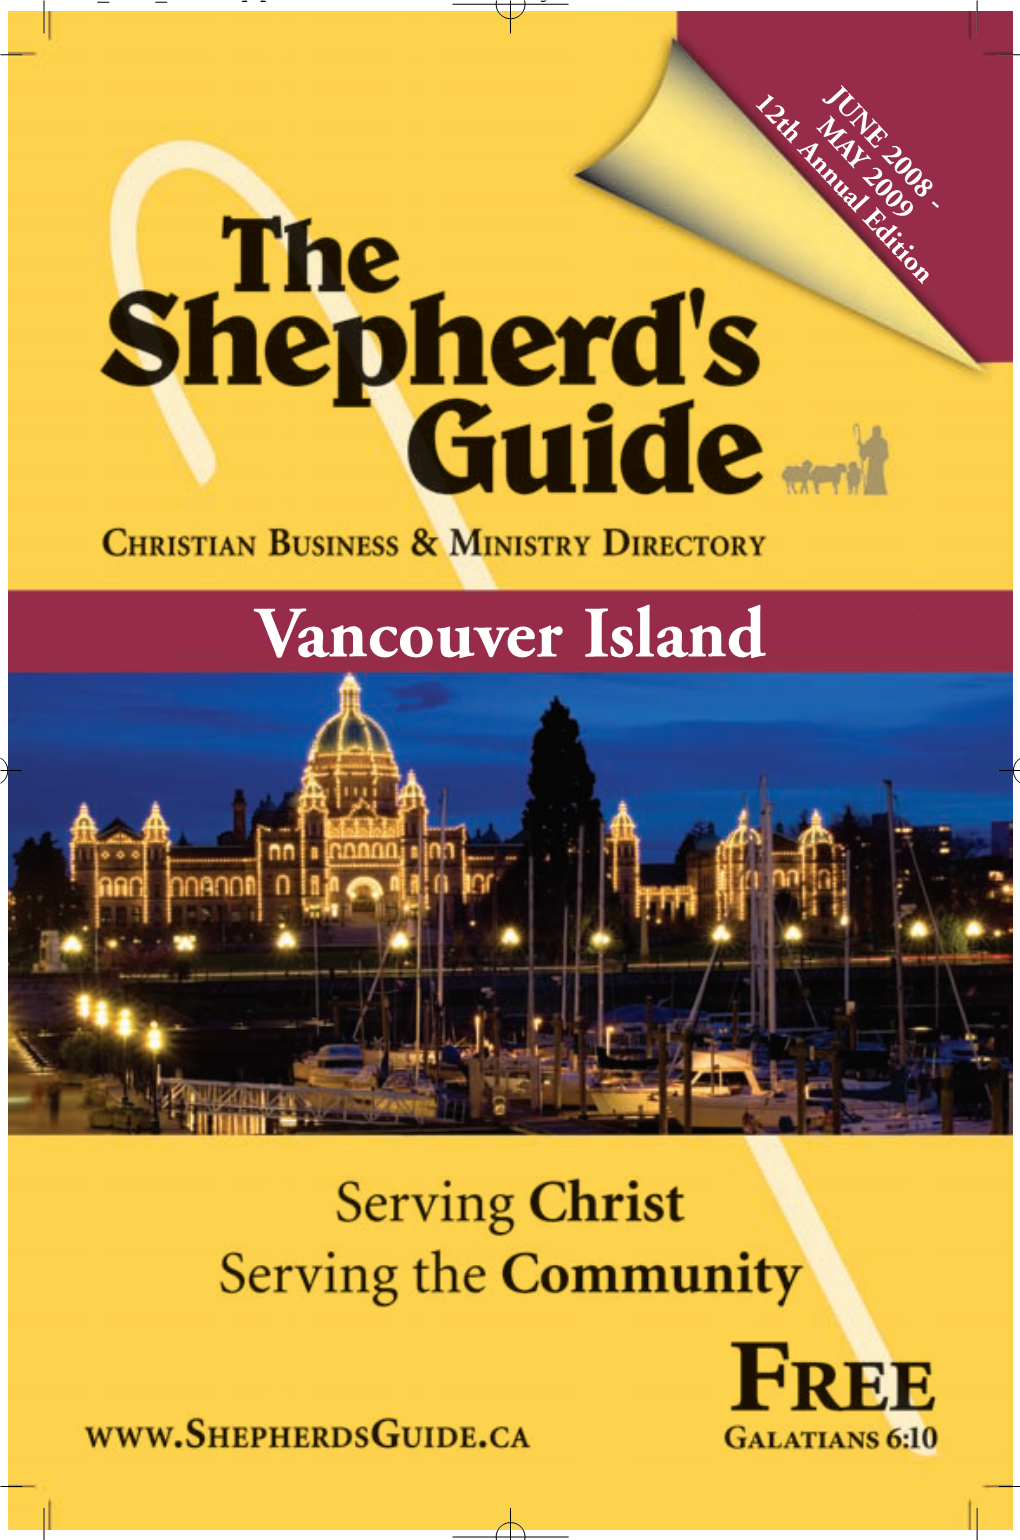 VANCOUVER ISLAND the Shepherd's Guide